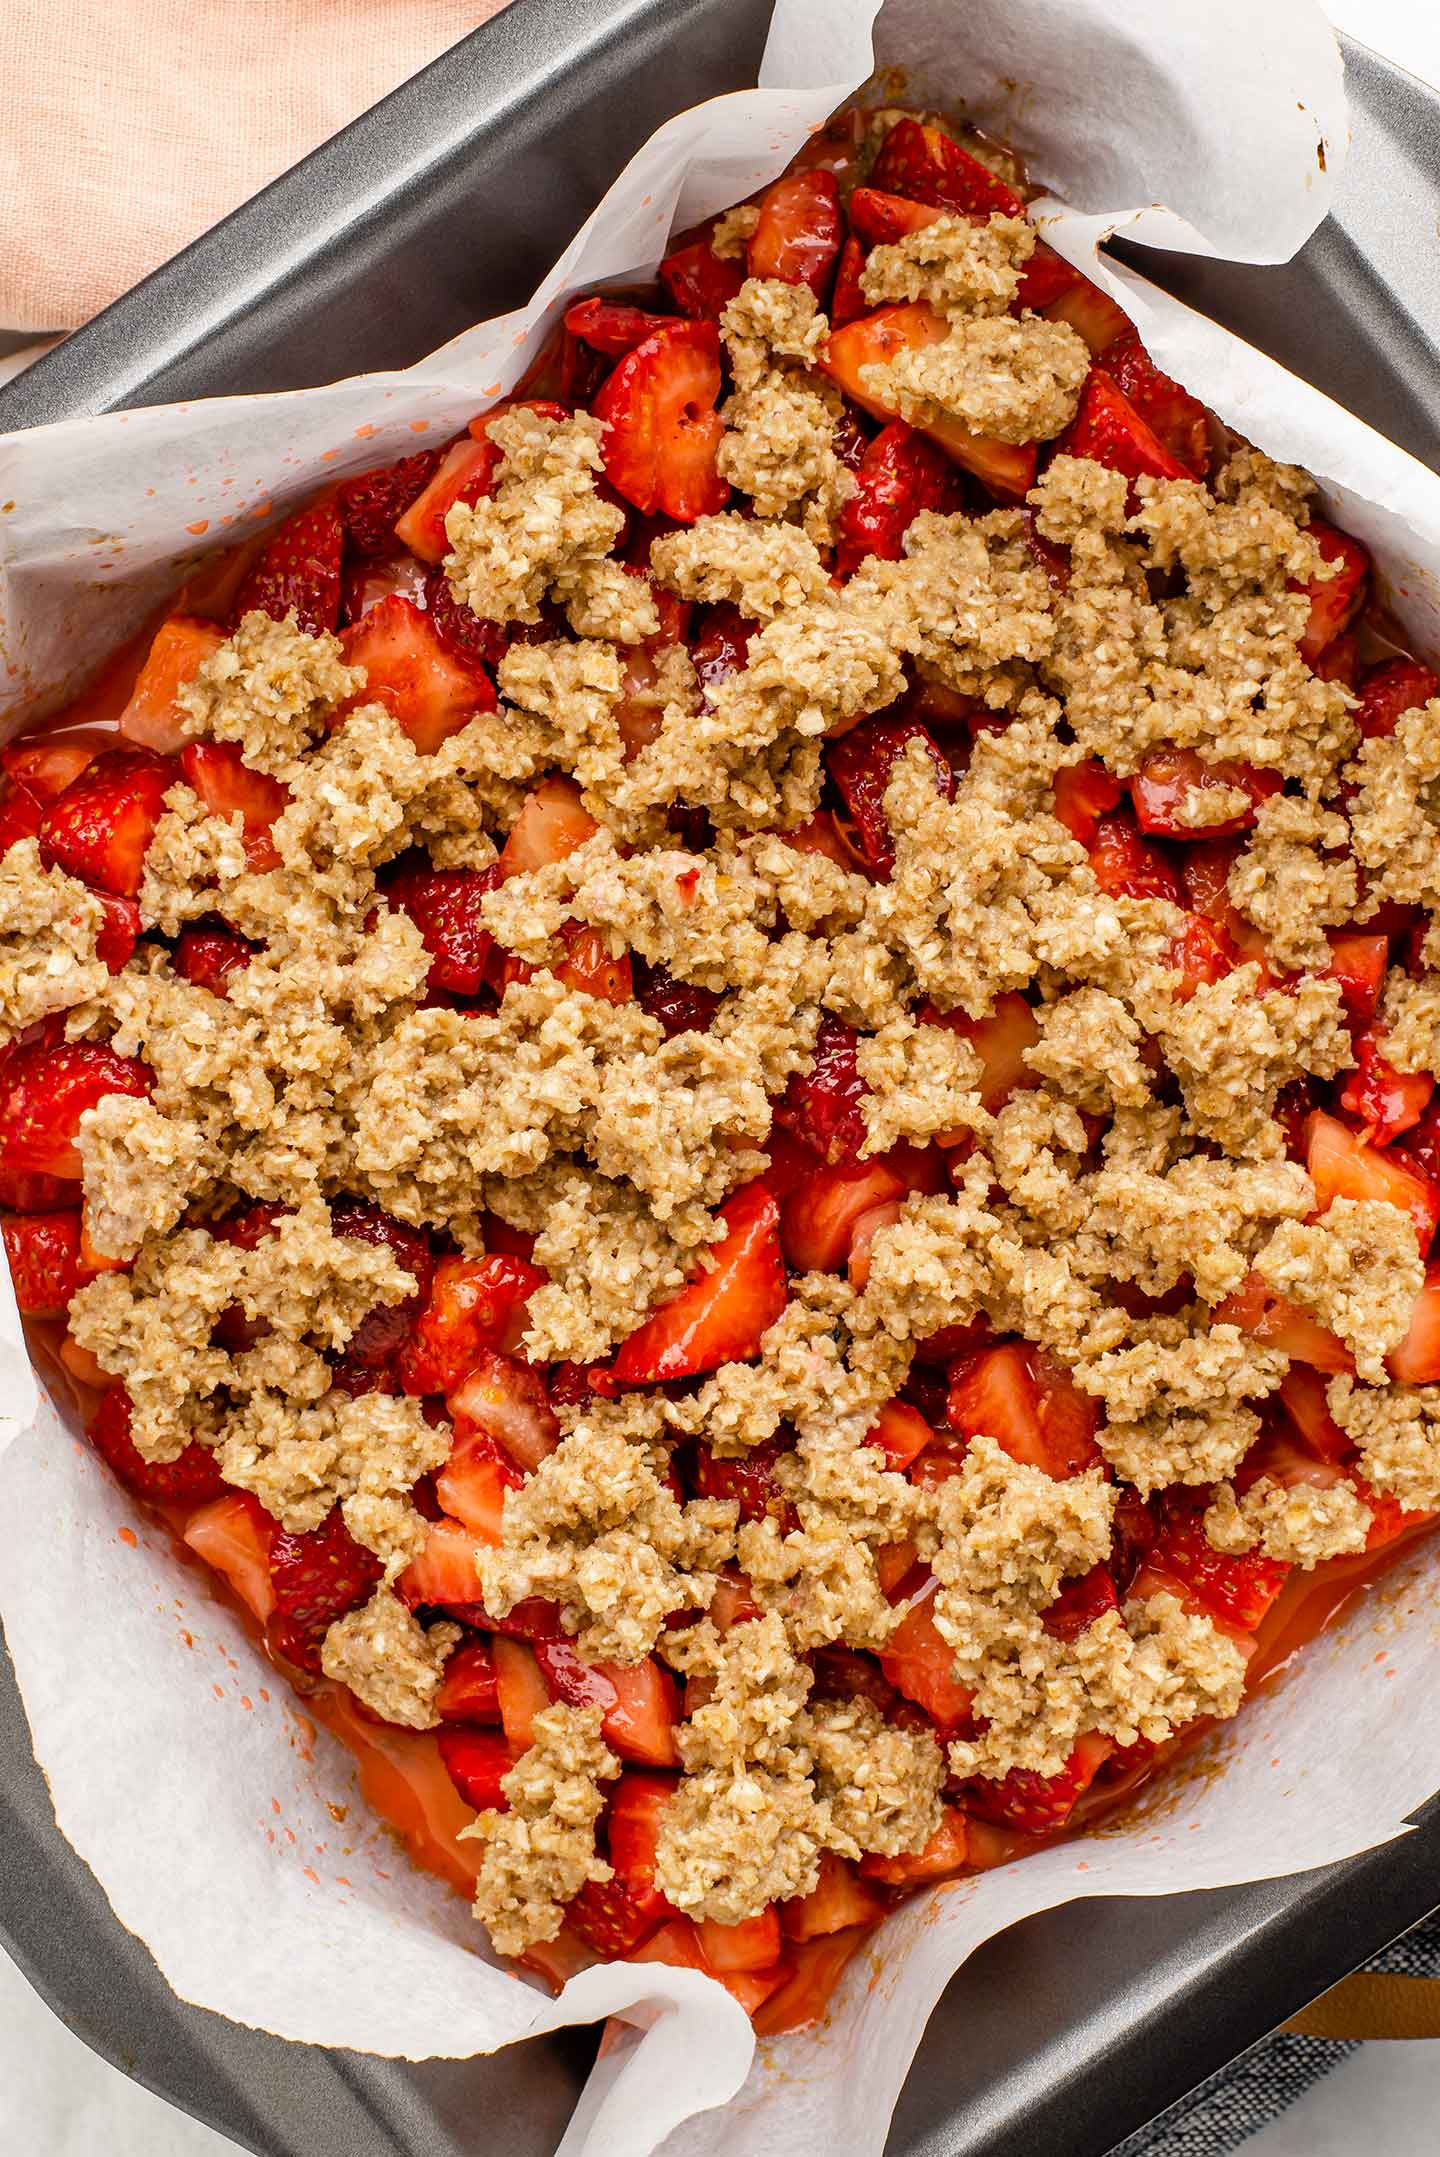 Top down view of the strawberry filling and oat, walnut topping having been added to the pre-baked crust.